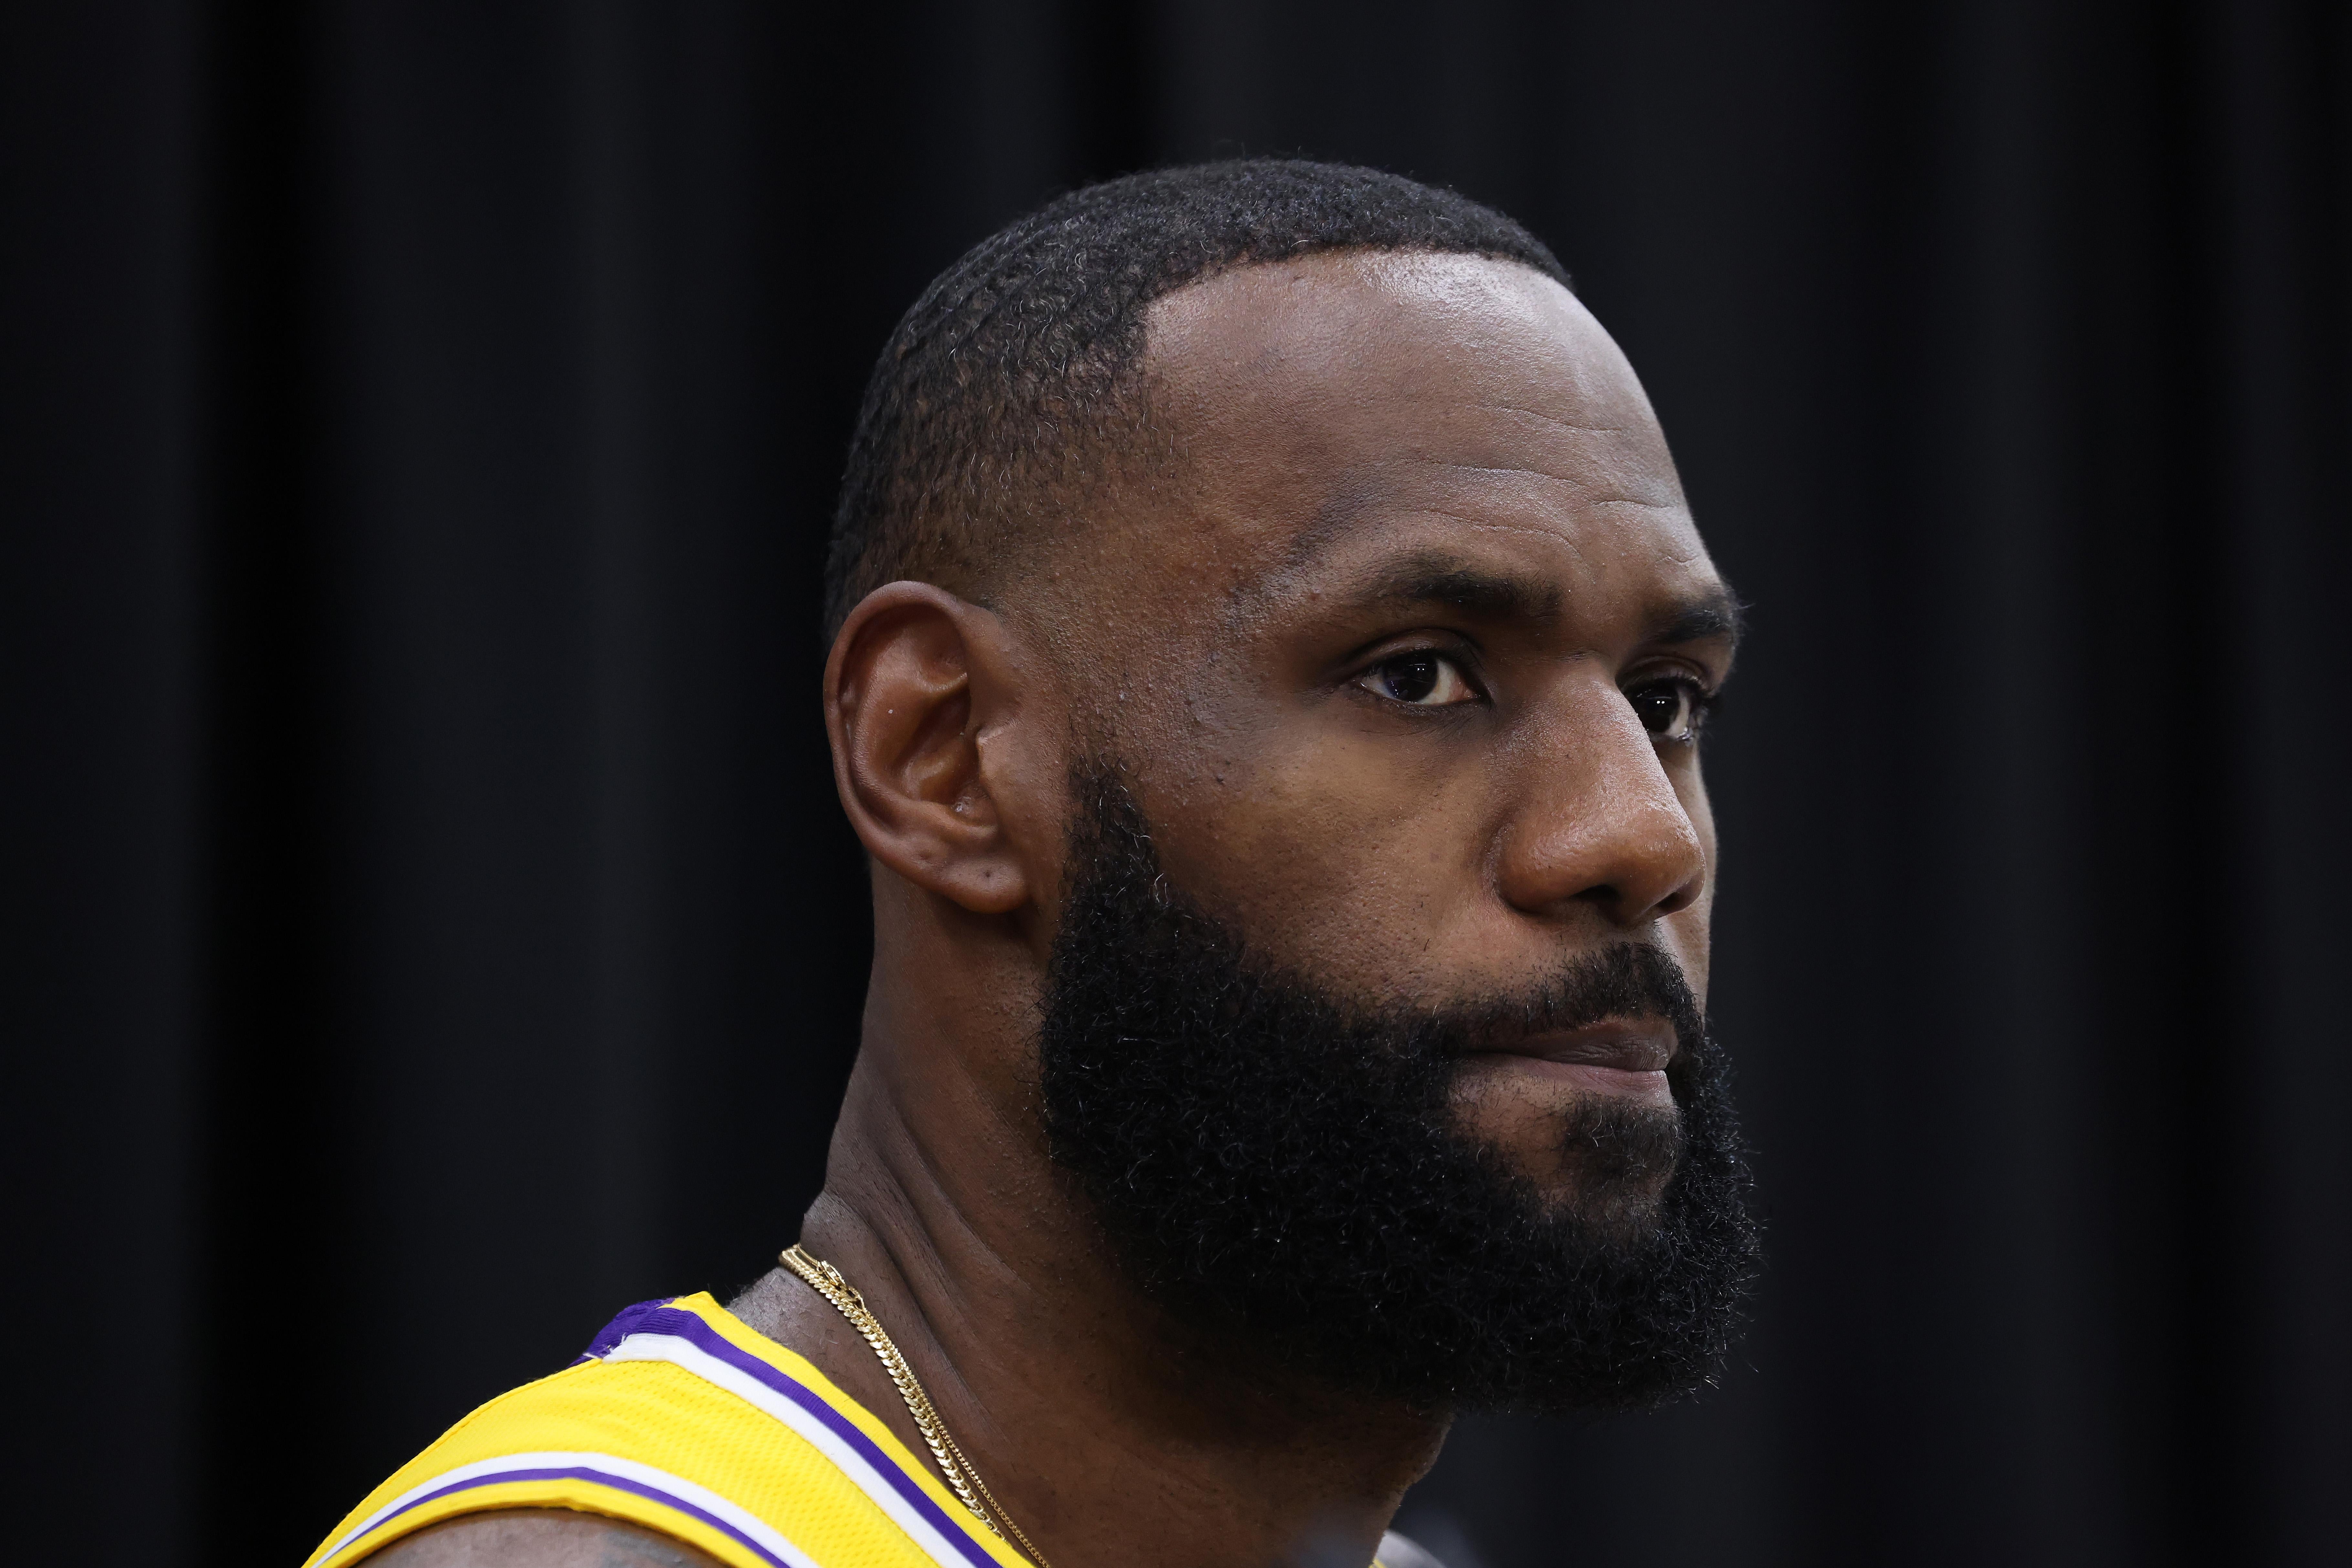 A close-up of LeBron James in his Los Angeles Lakers uniform.